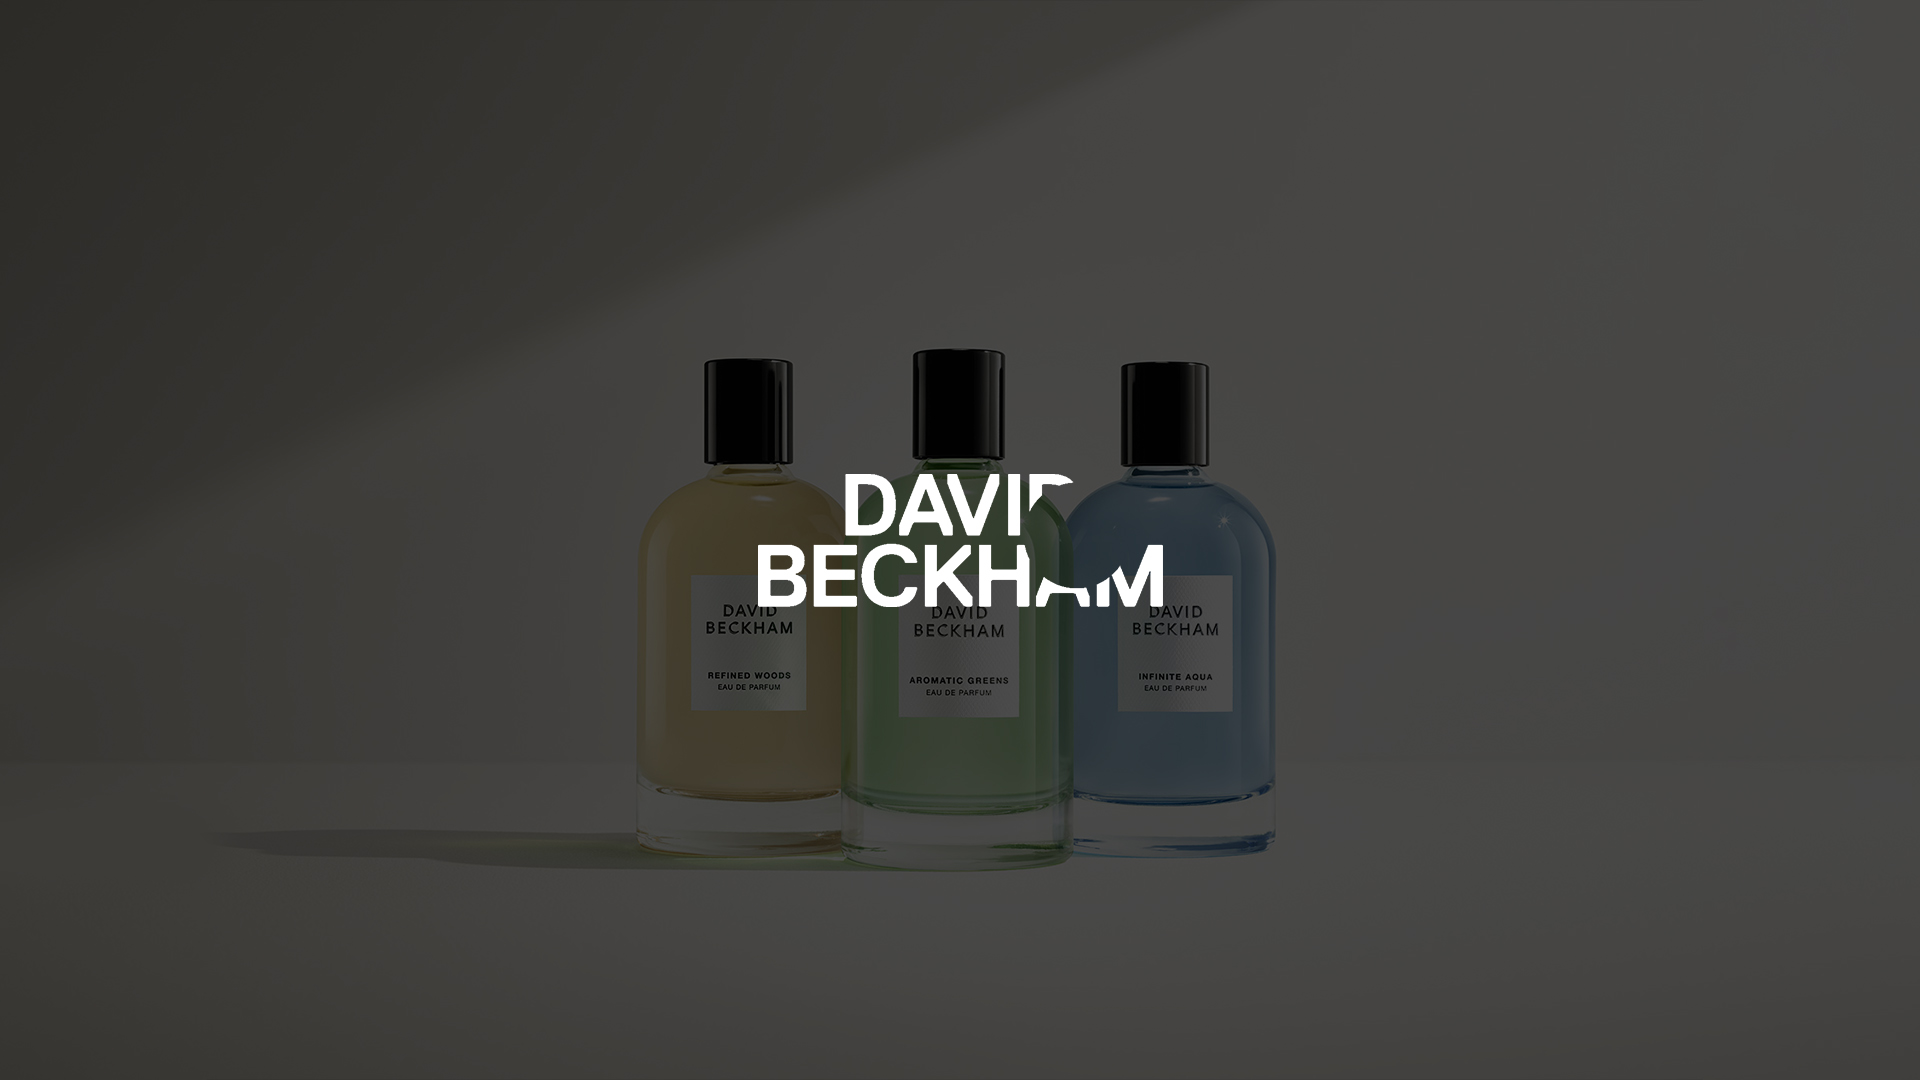 David Beckham's New Fragrances Inspired By His Journeys Around the World